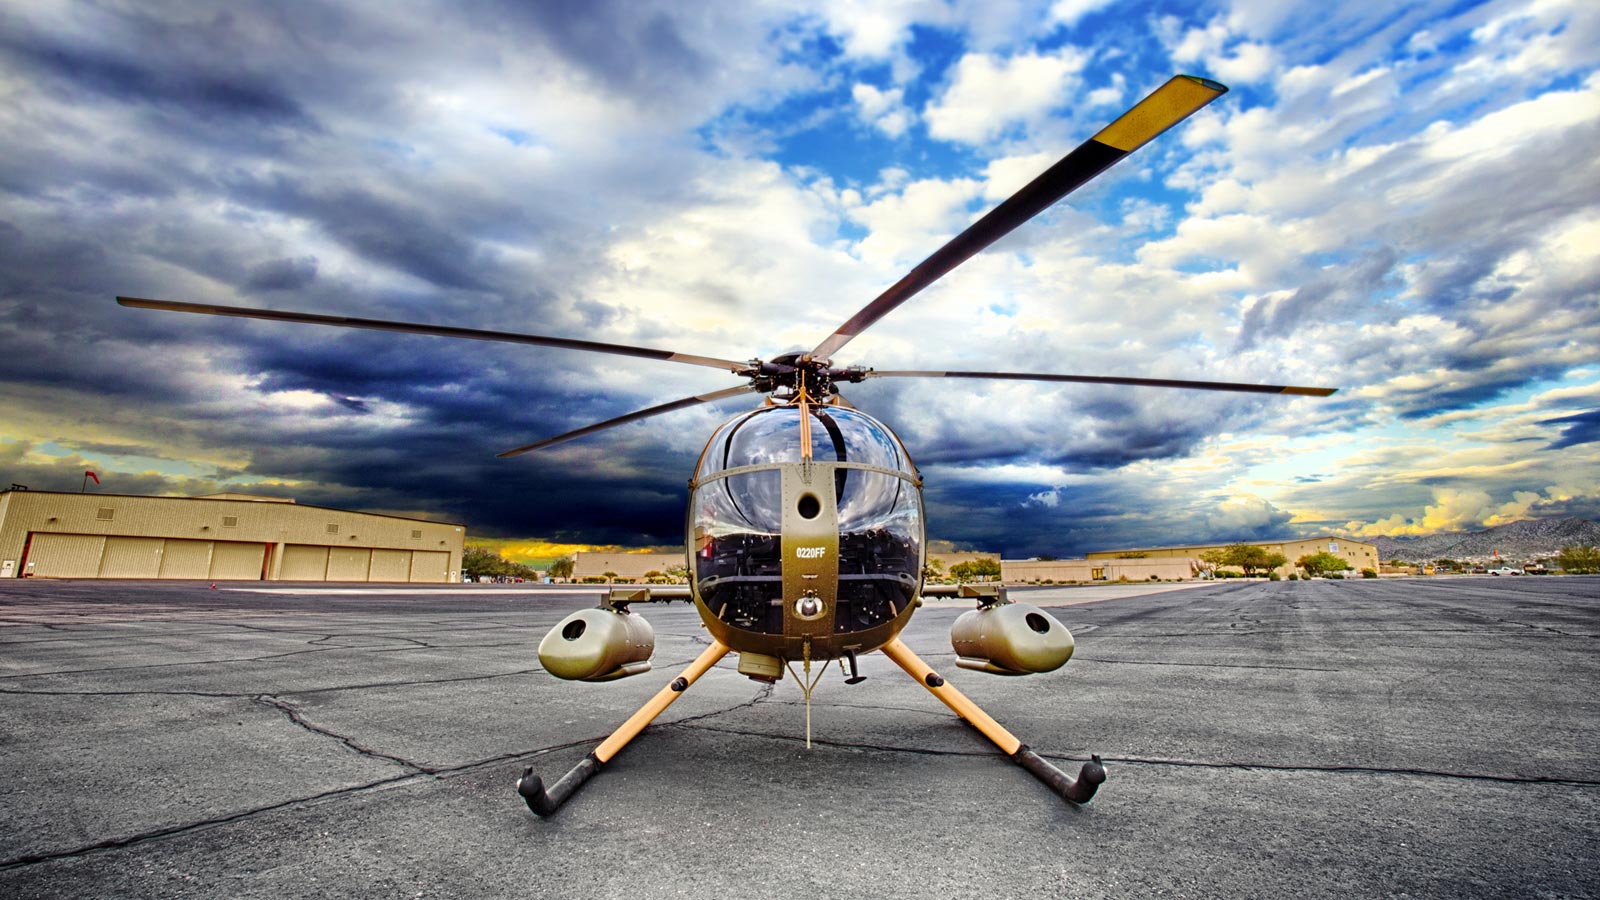 MD 530F Cayuse Warrior helicopter